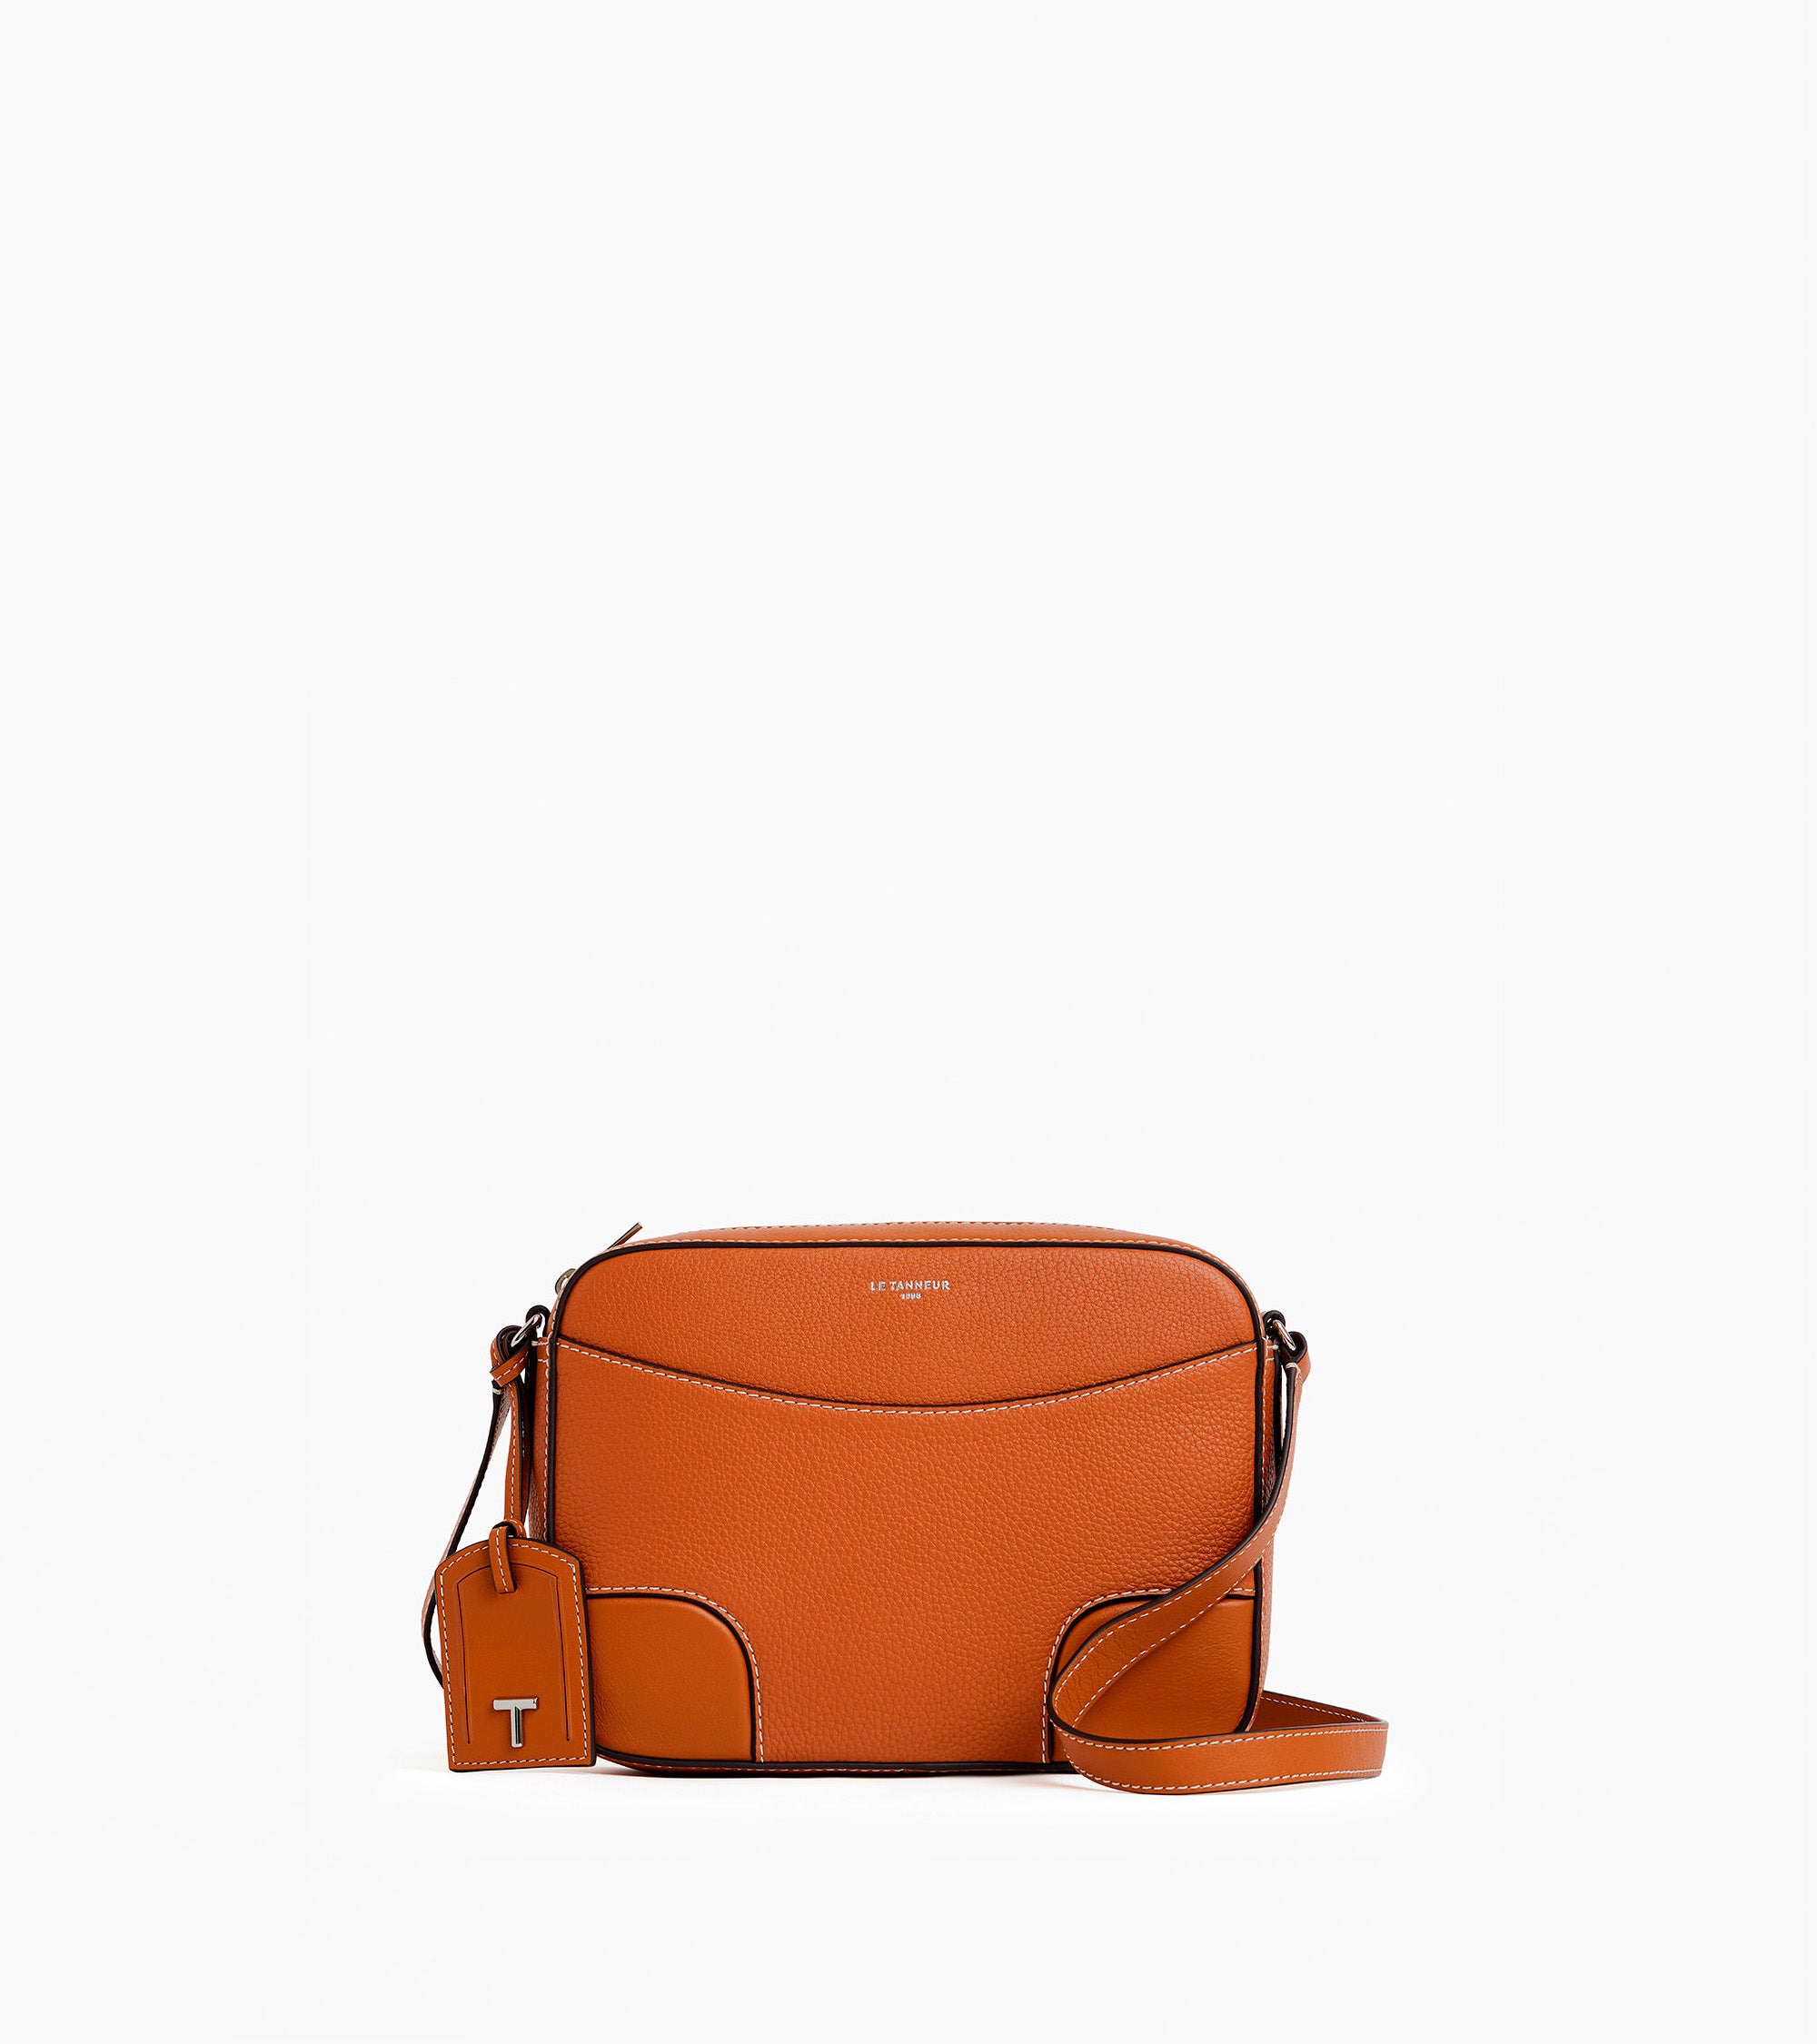 Romy medium shoulder bag in smooth grained leather